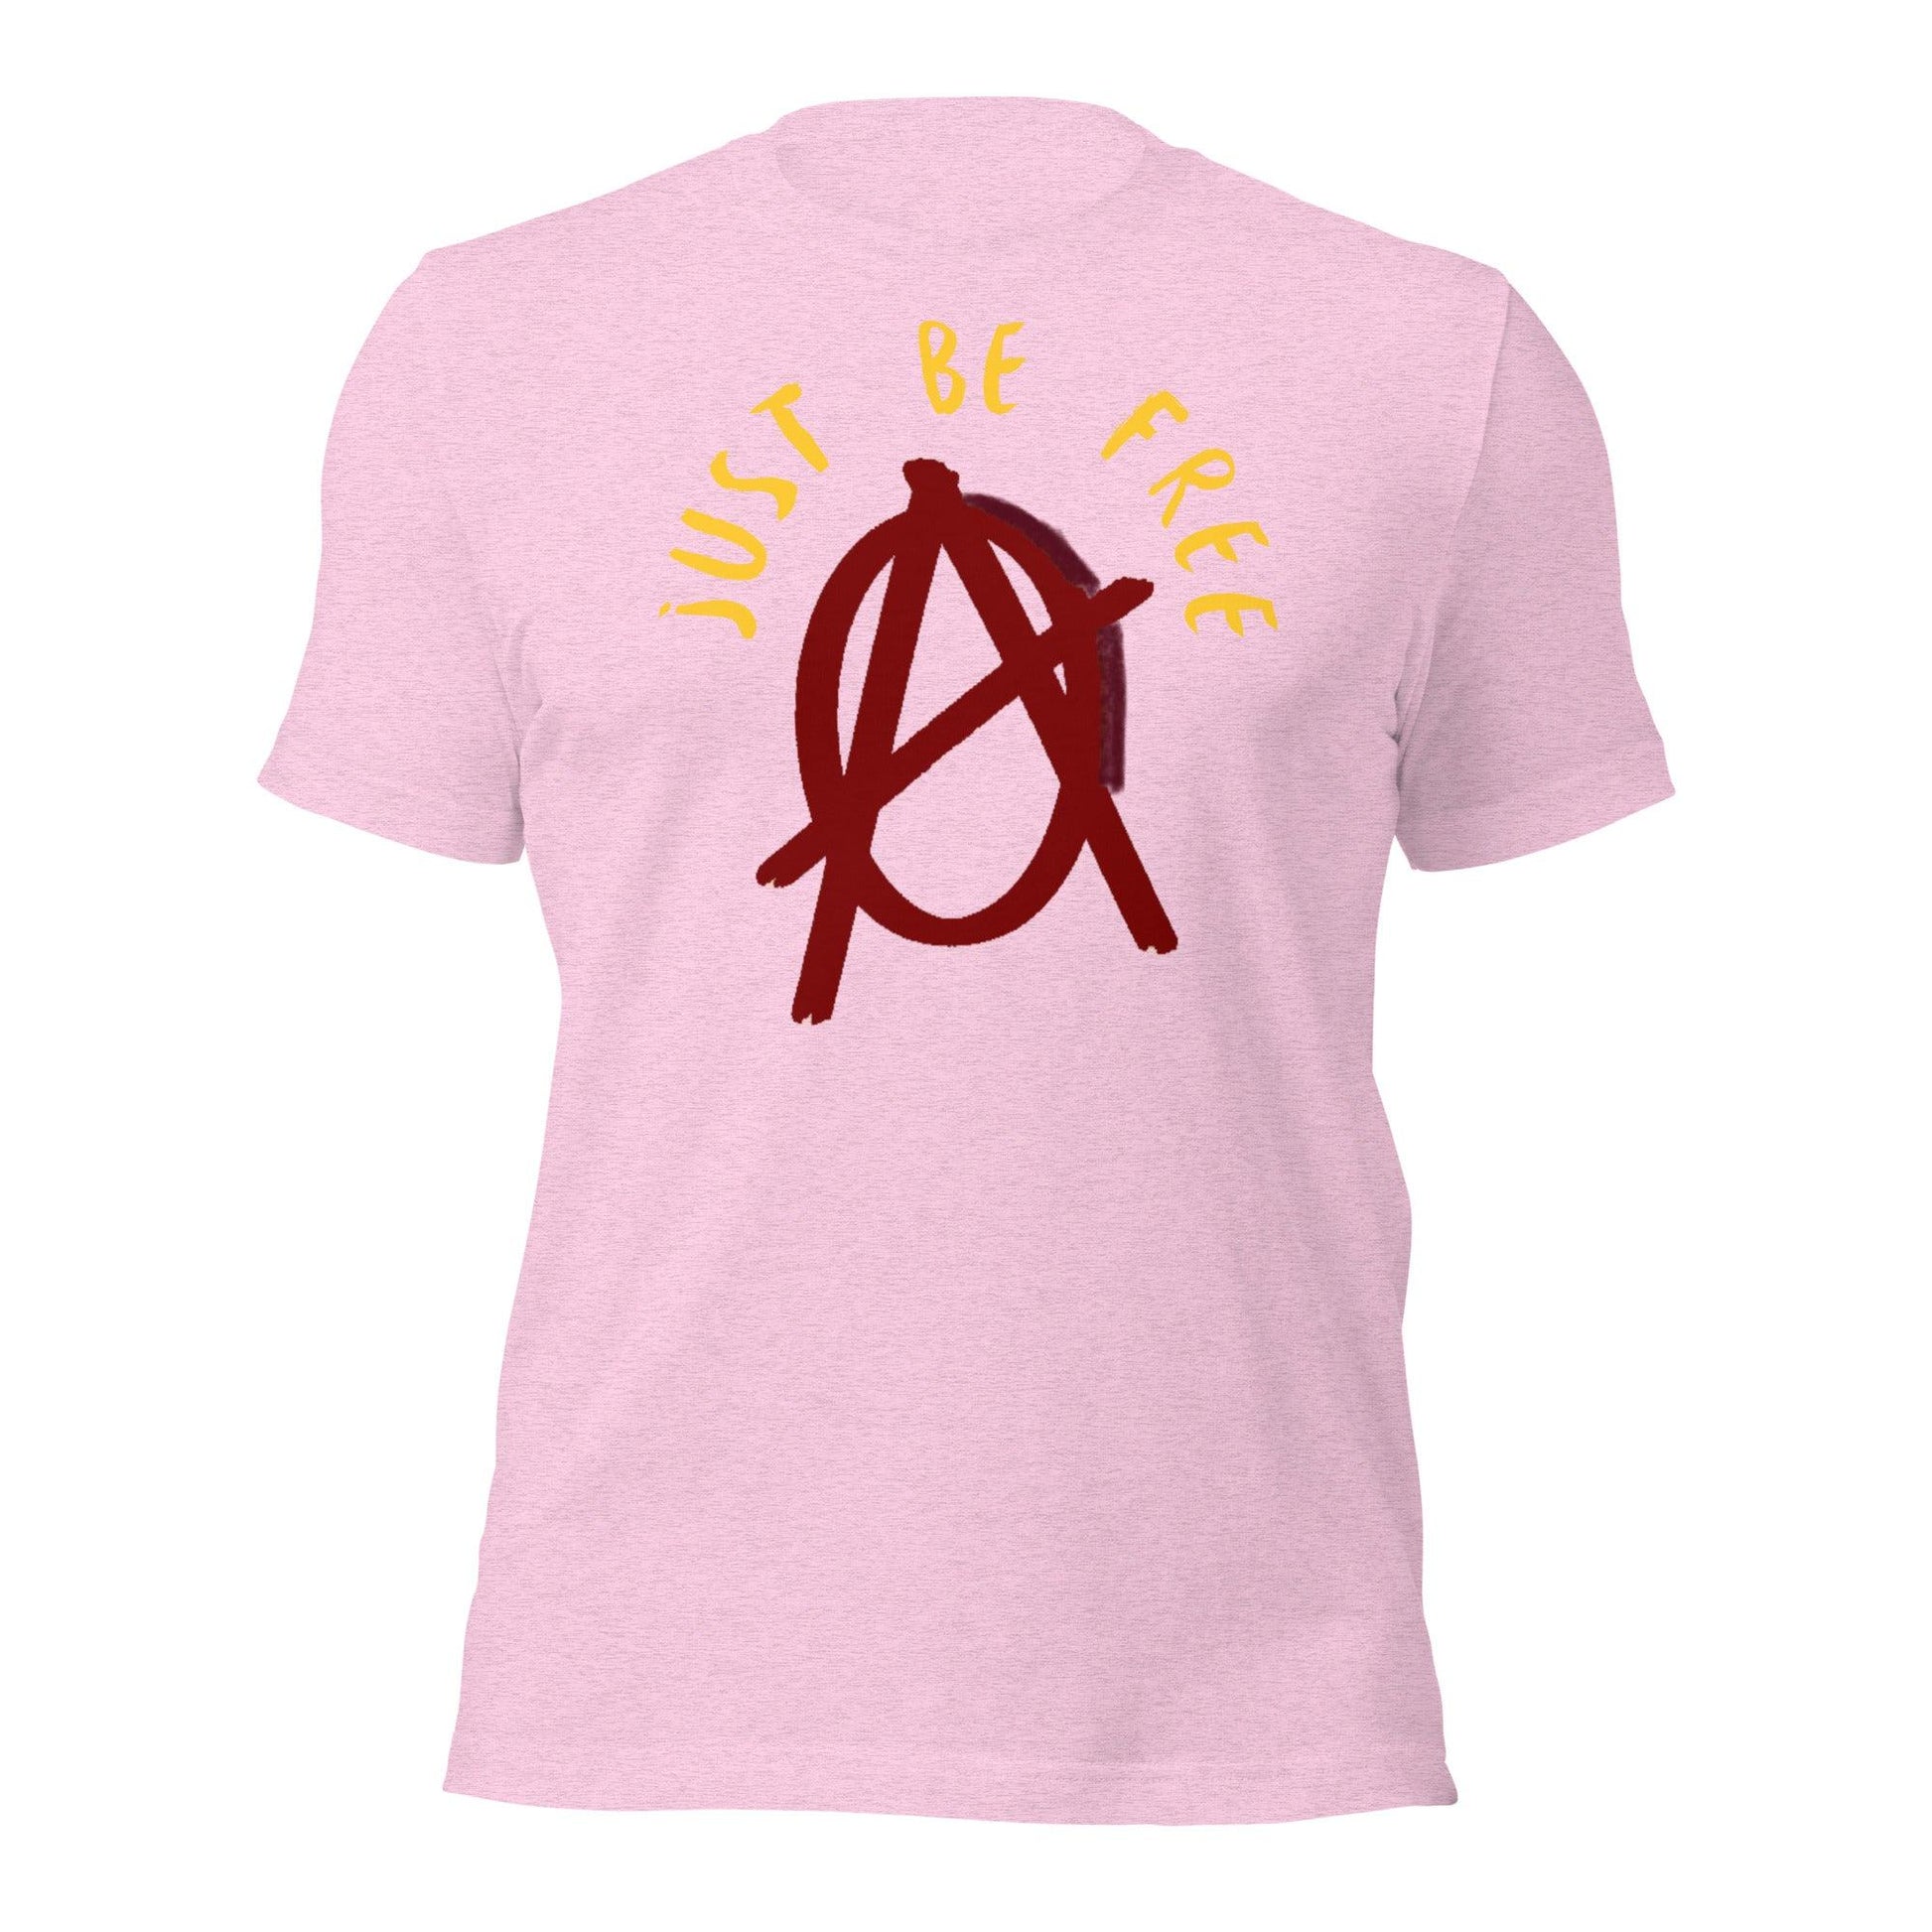 Anarchy Wear "Just Be Free" Red Pastels Unisex t-shirt - AnarchyWear